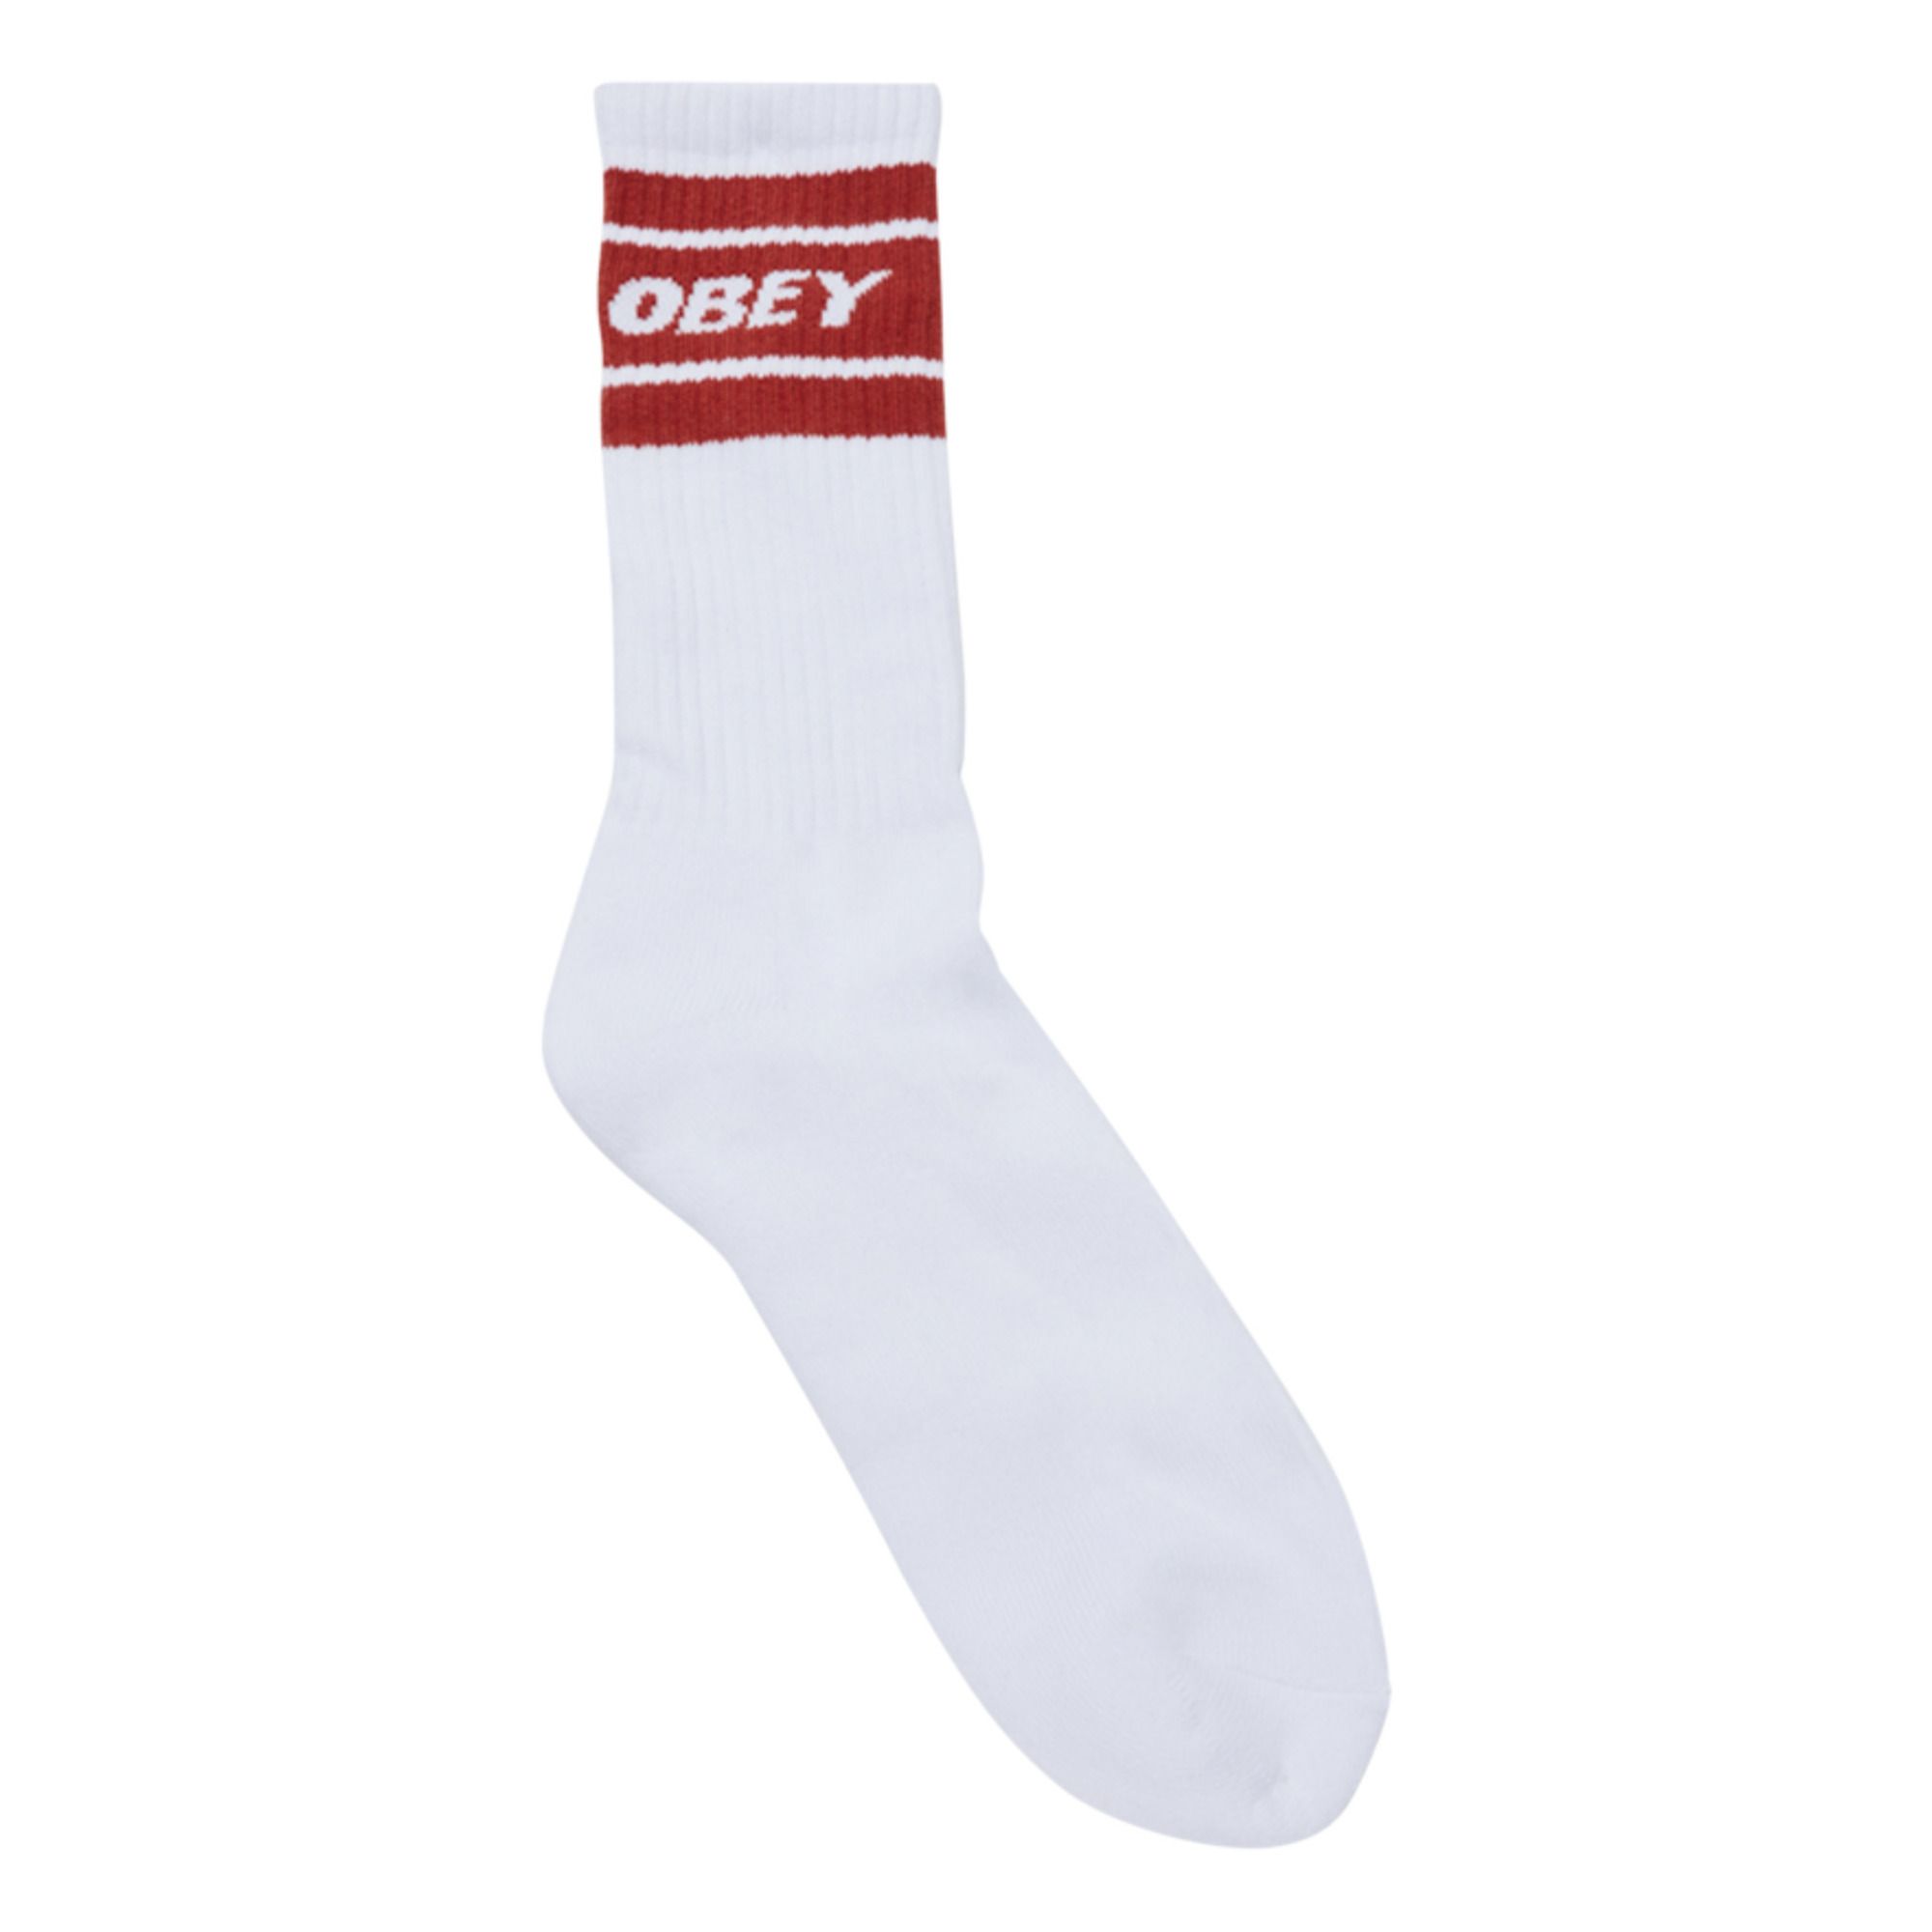 Obey - Chaussettes - Homme - Rouge